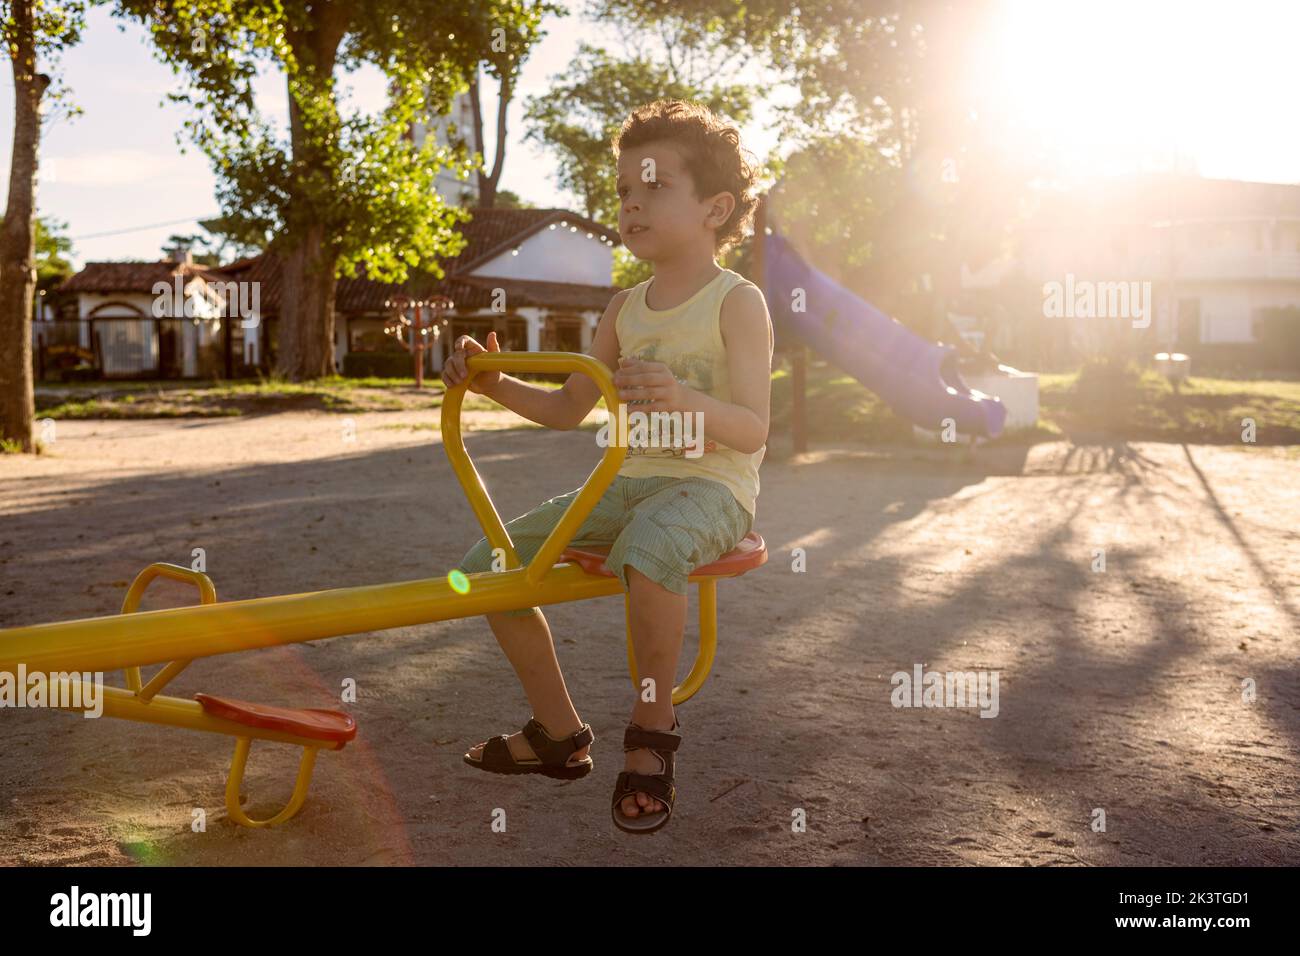 little boy of Caucasian appearance with curly hair riding on a seesaw in the park Stock Photo